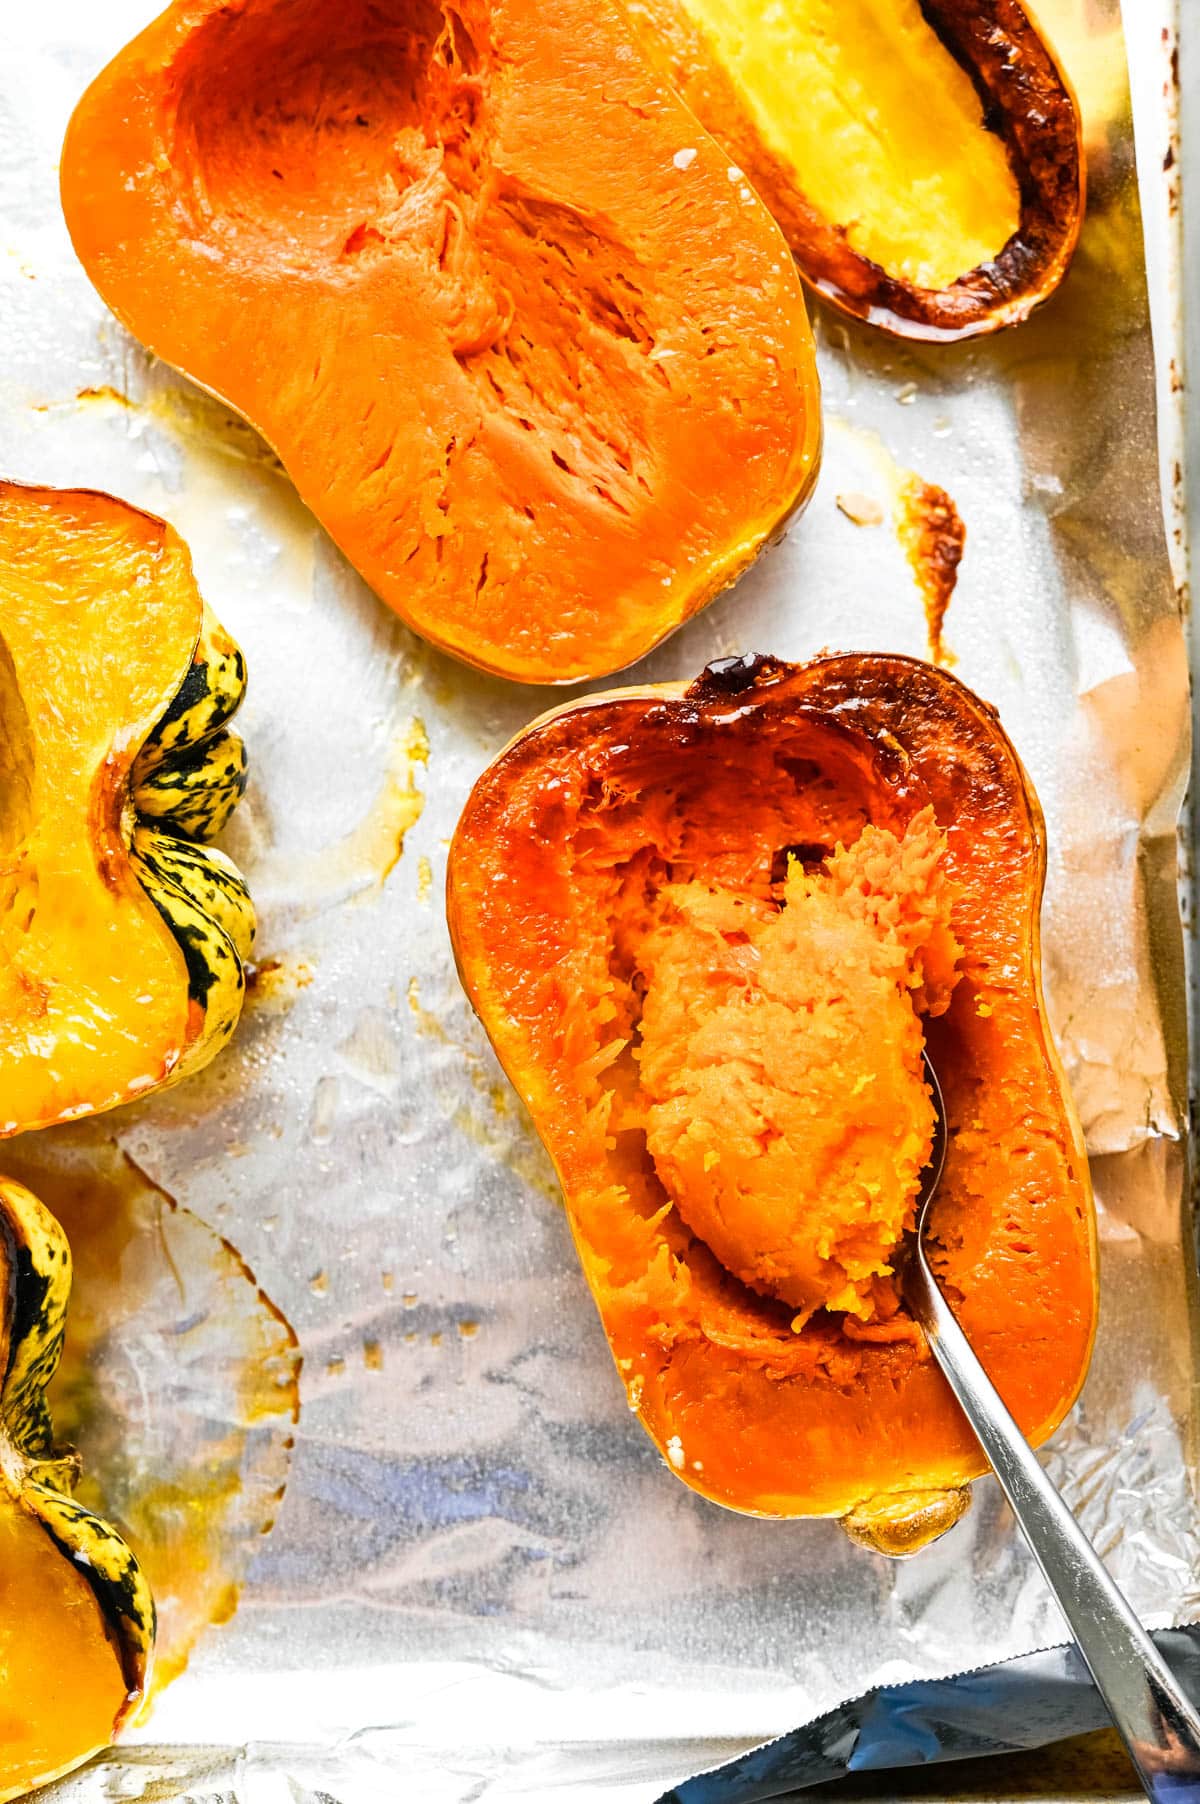 Scooping flesh from the roasted squash.